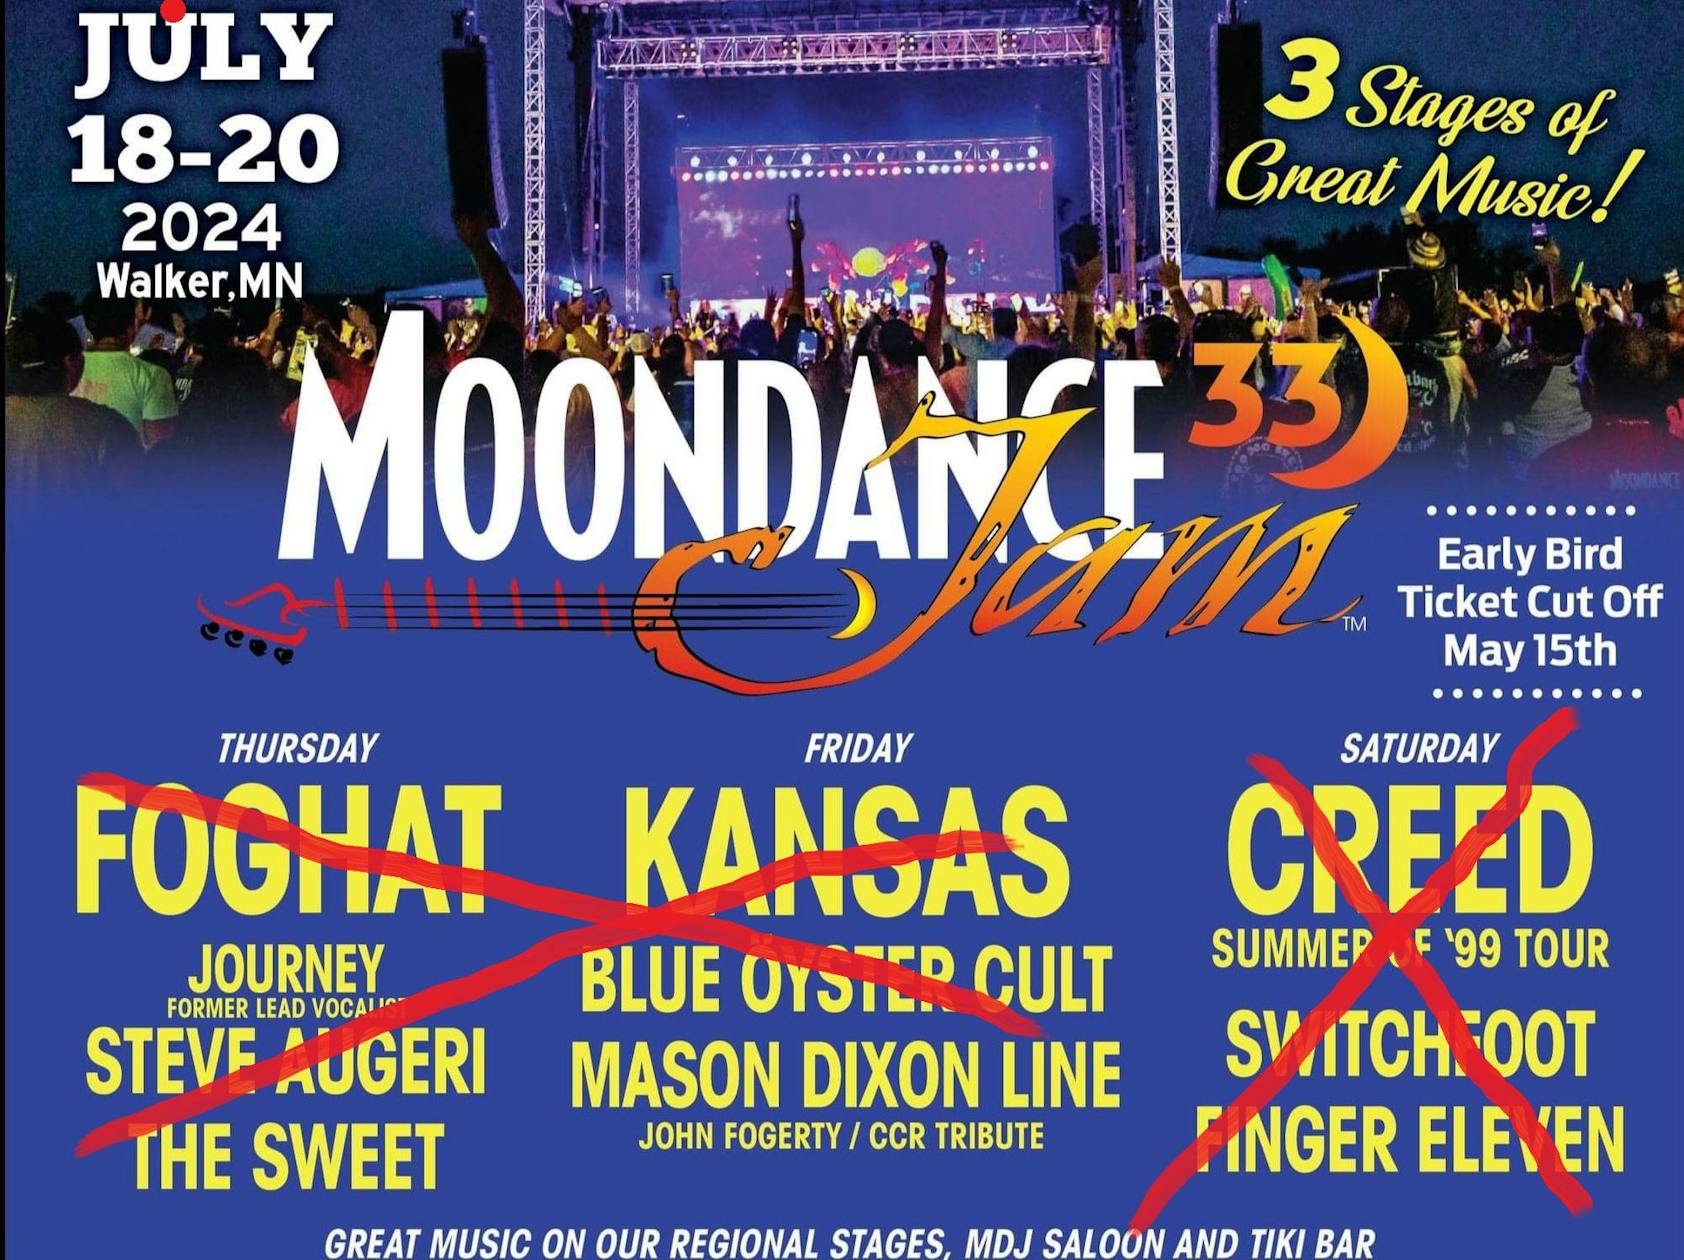 Northern Minnesota's Moondance Jam rock fest cancels all headliners without offering refunds